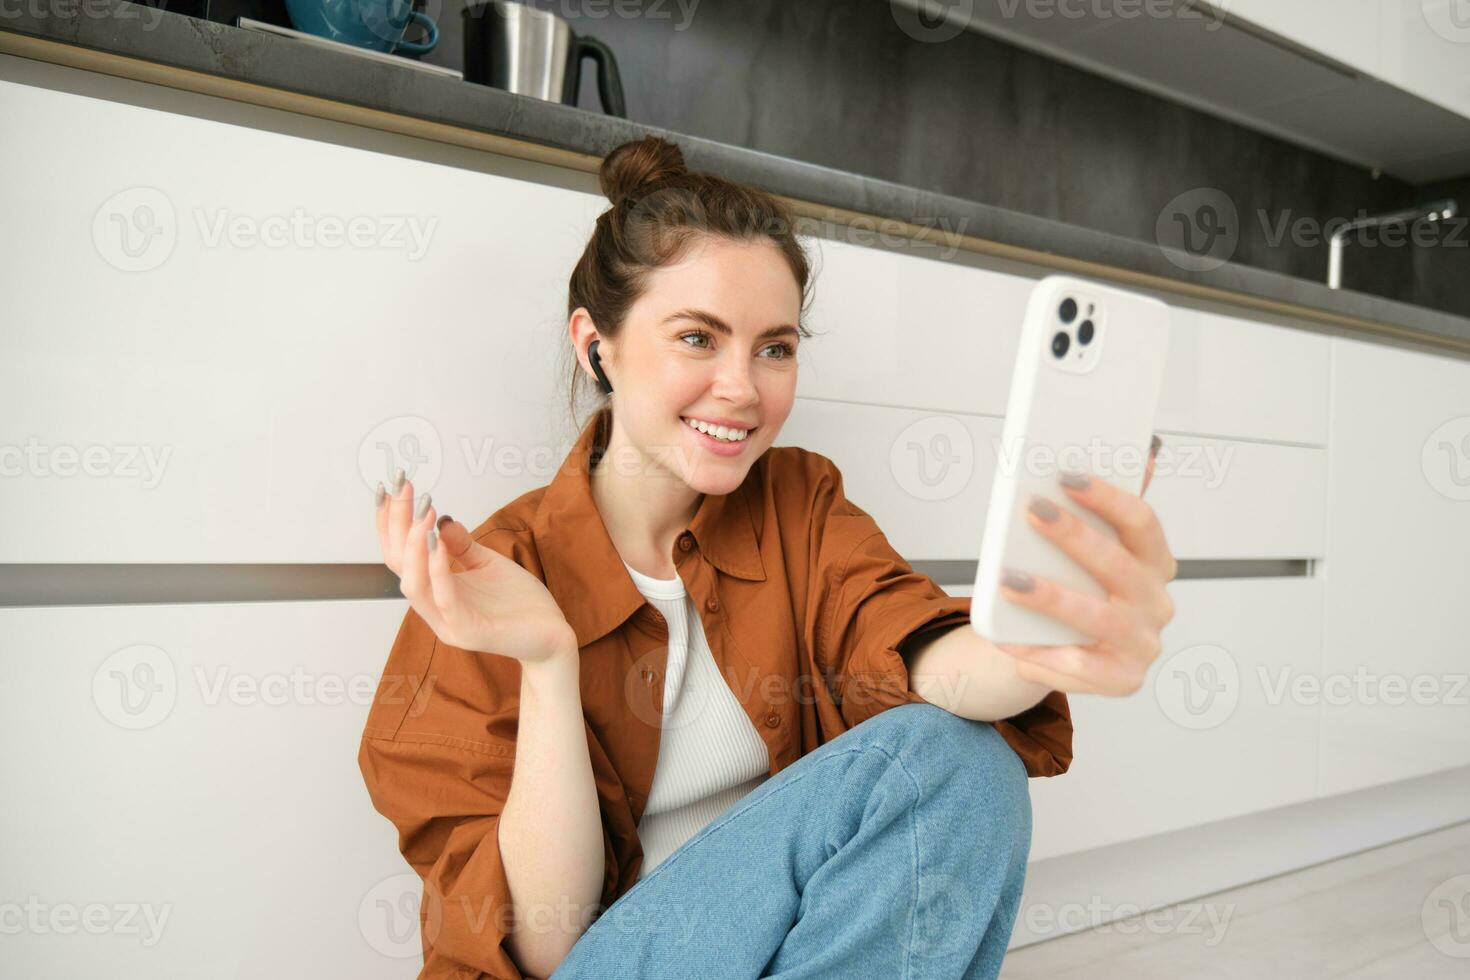 Friendly smiling woman talking on mobile phone app, using wireless earphones, looking at screen, online chatting, video calling friend, sitting on kitchen floor photo